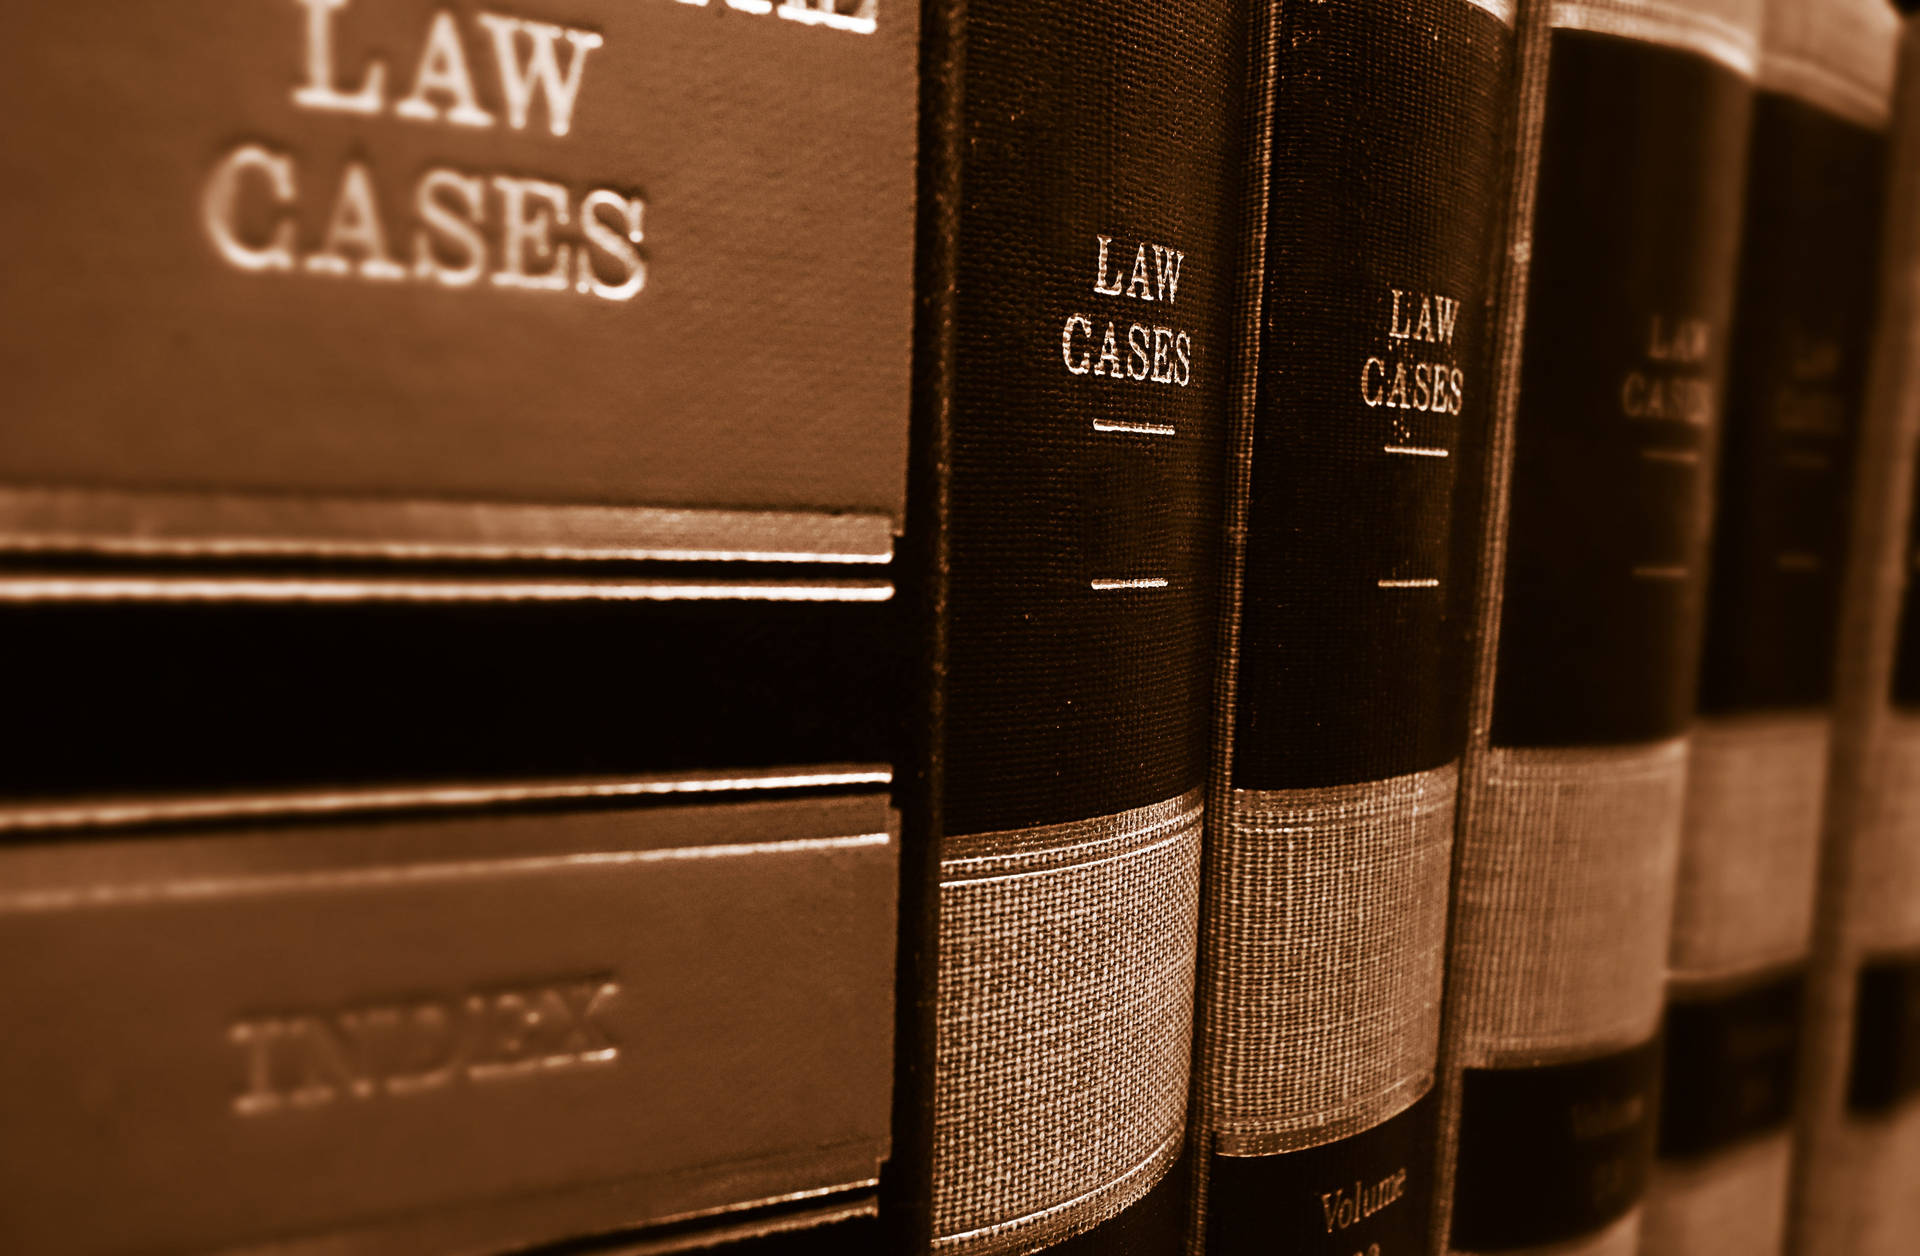 Law Cases Reference Books Wallpaper